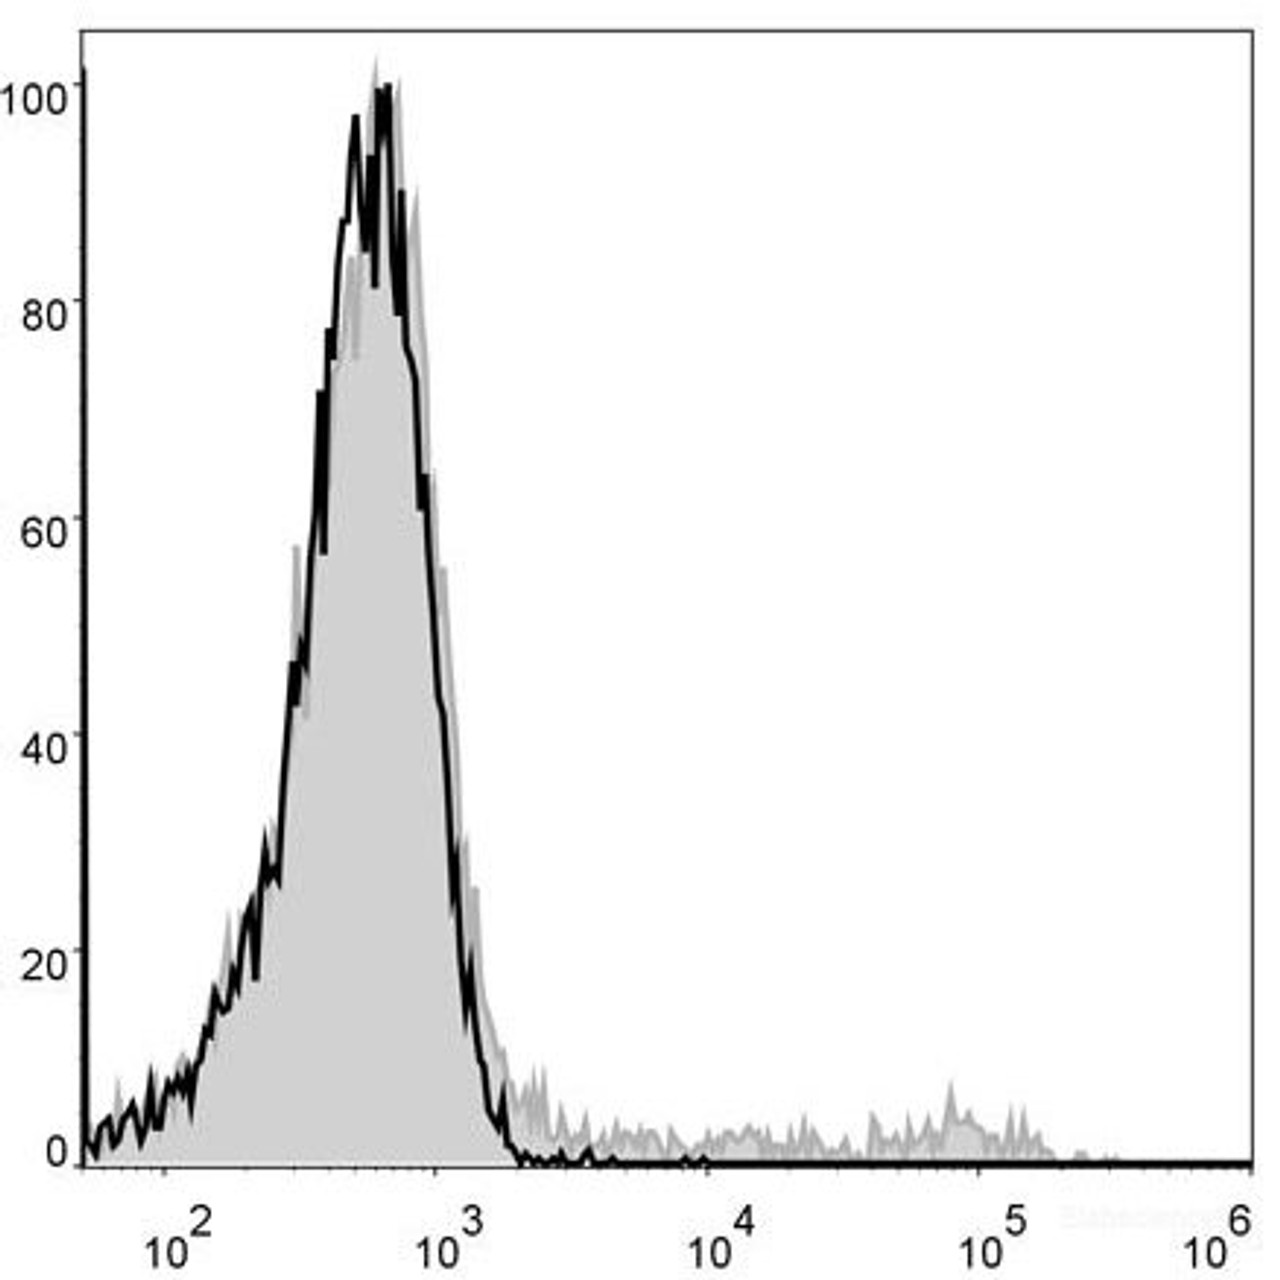 Mouse bone marrow cells are stained with PE Anti-Mouse CD49b Antibody[Used at .2 μg/1<sup>6</sup> cells dilution](filled gray histogram). Unstained bone marrow cells (blank black histogram) are used as control.